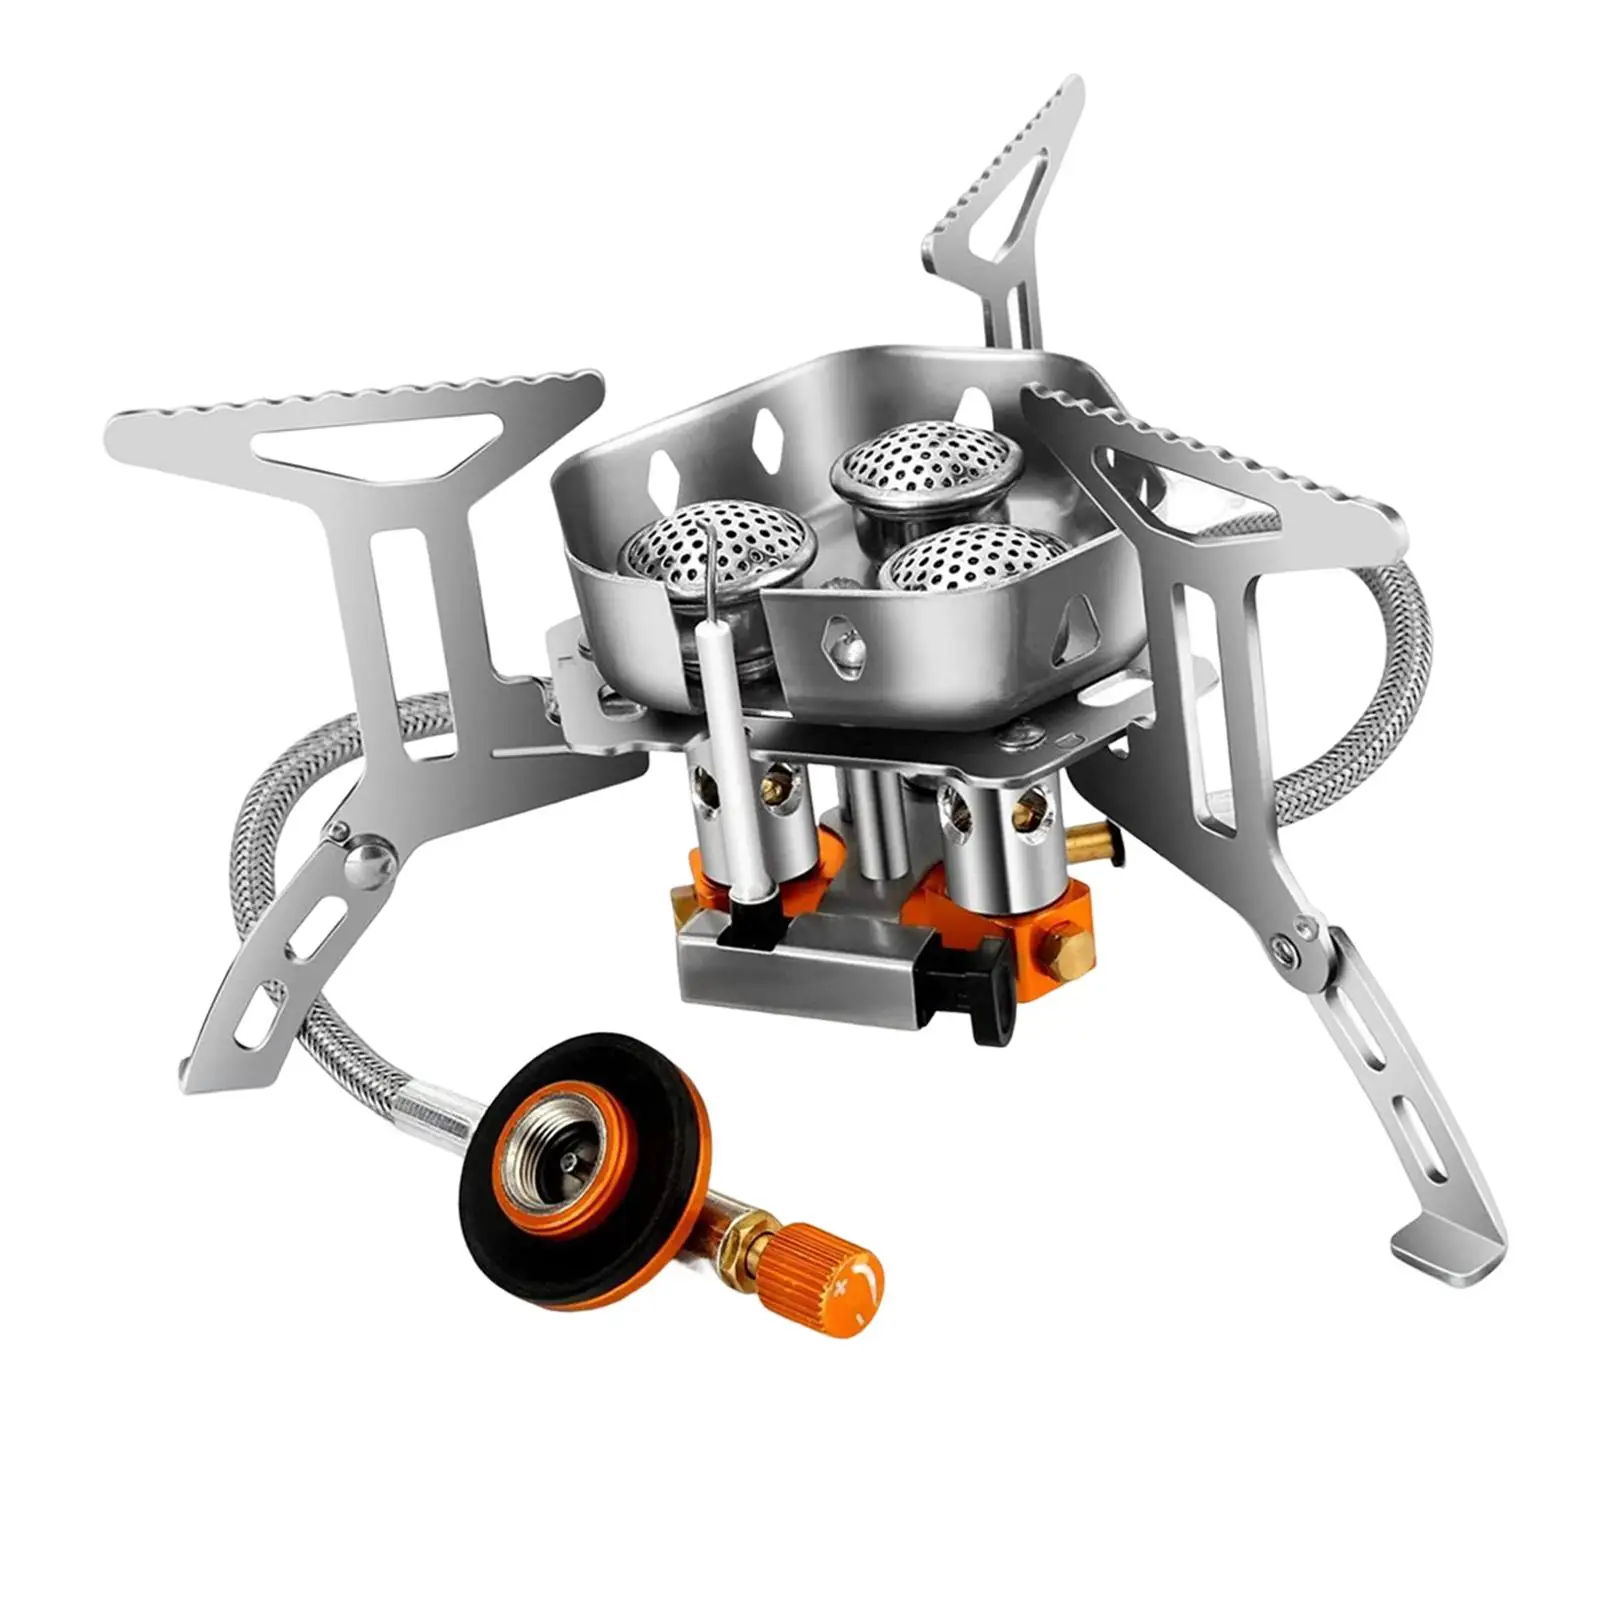 

Folding Camping Gas Stove Lightweight 3 Heads with Piezo Ignition Gear Windproof for Hiking Outdoor Picnic Travel Backpacking